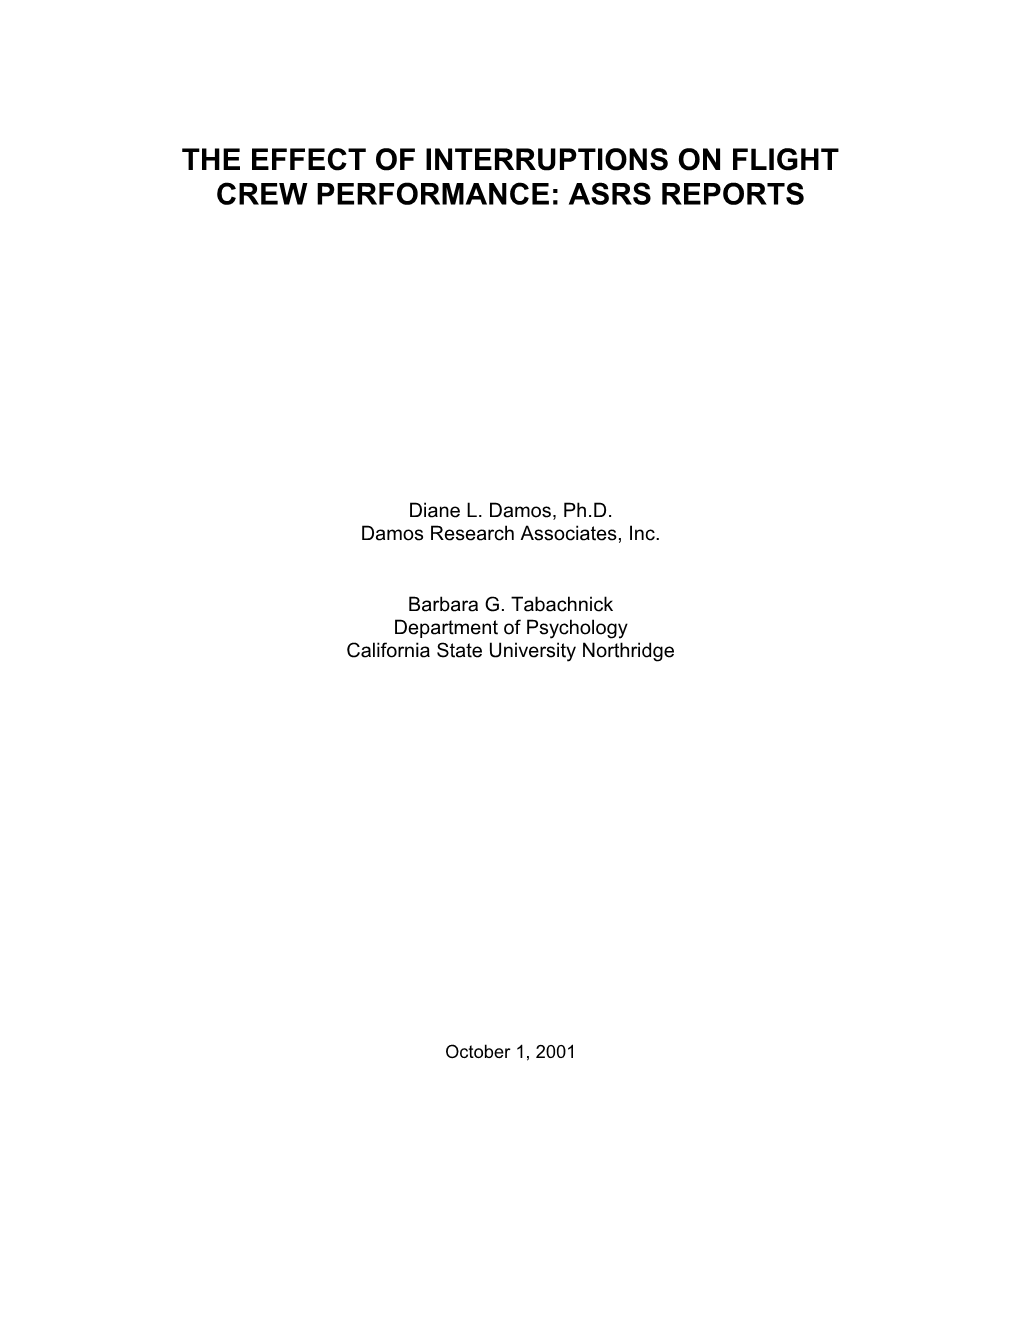 The Effect of Interruptions on Flight Crew Performance: Asrs Reports